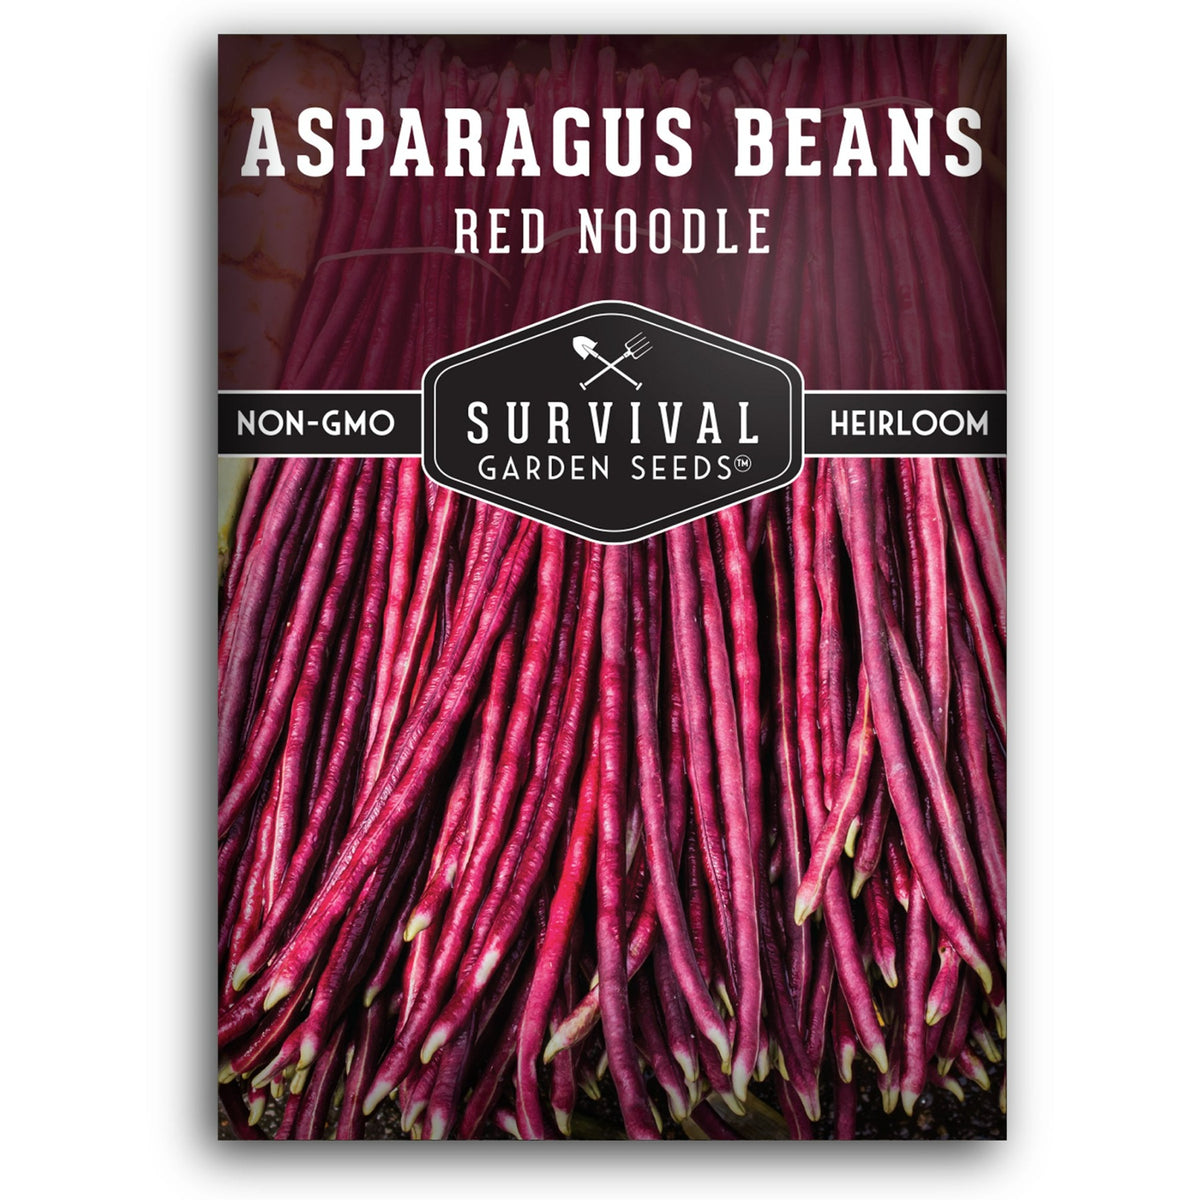 Red Noodle Asparagus Bean seeds for planting